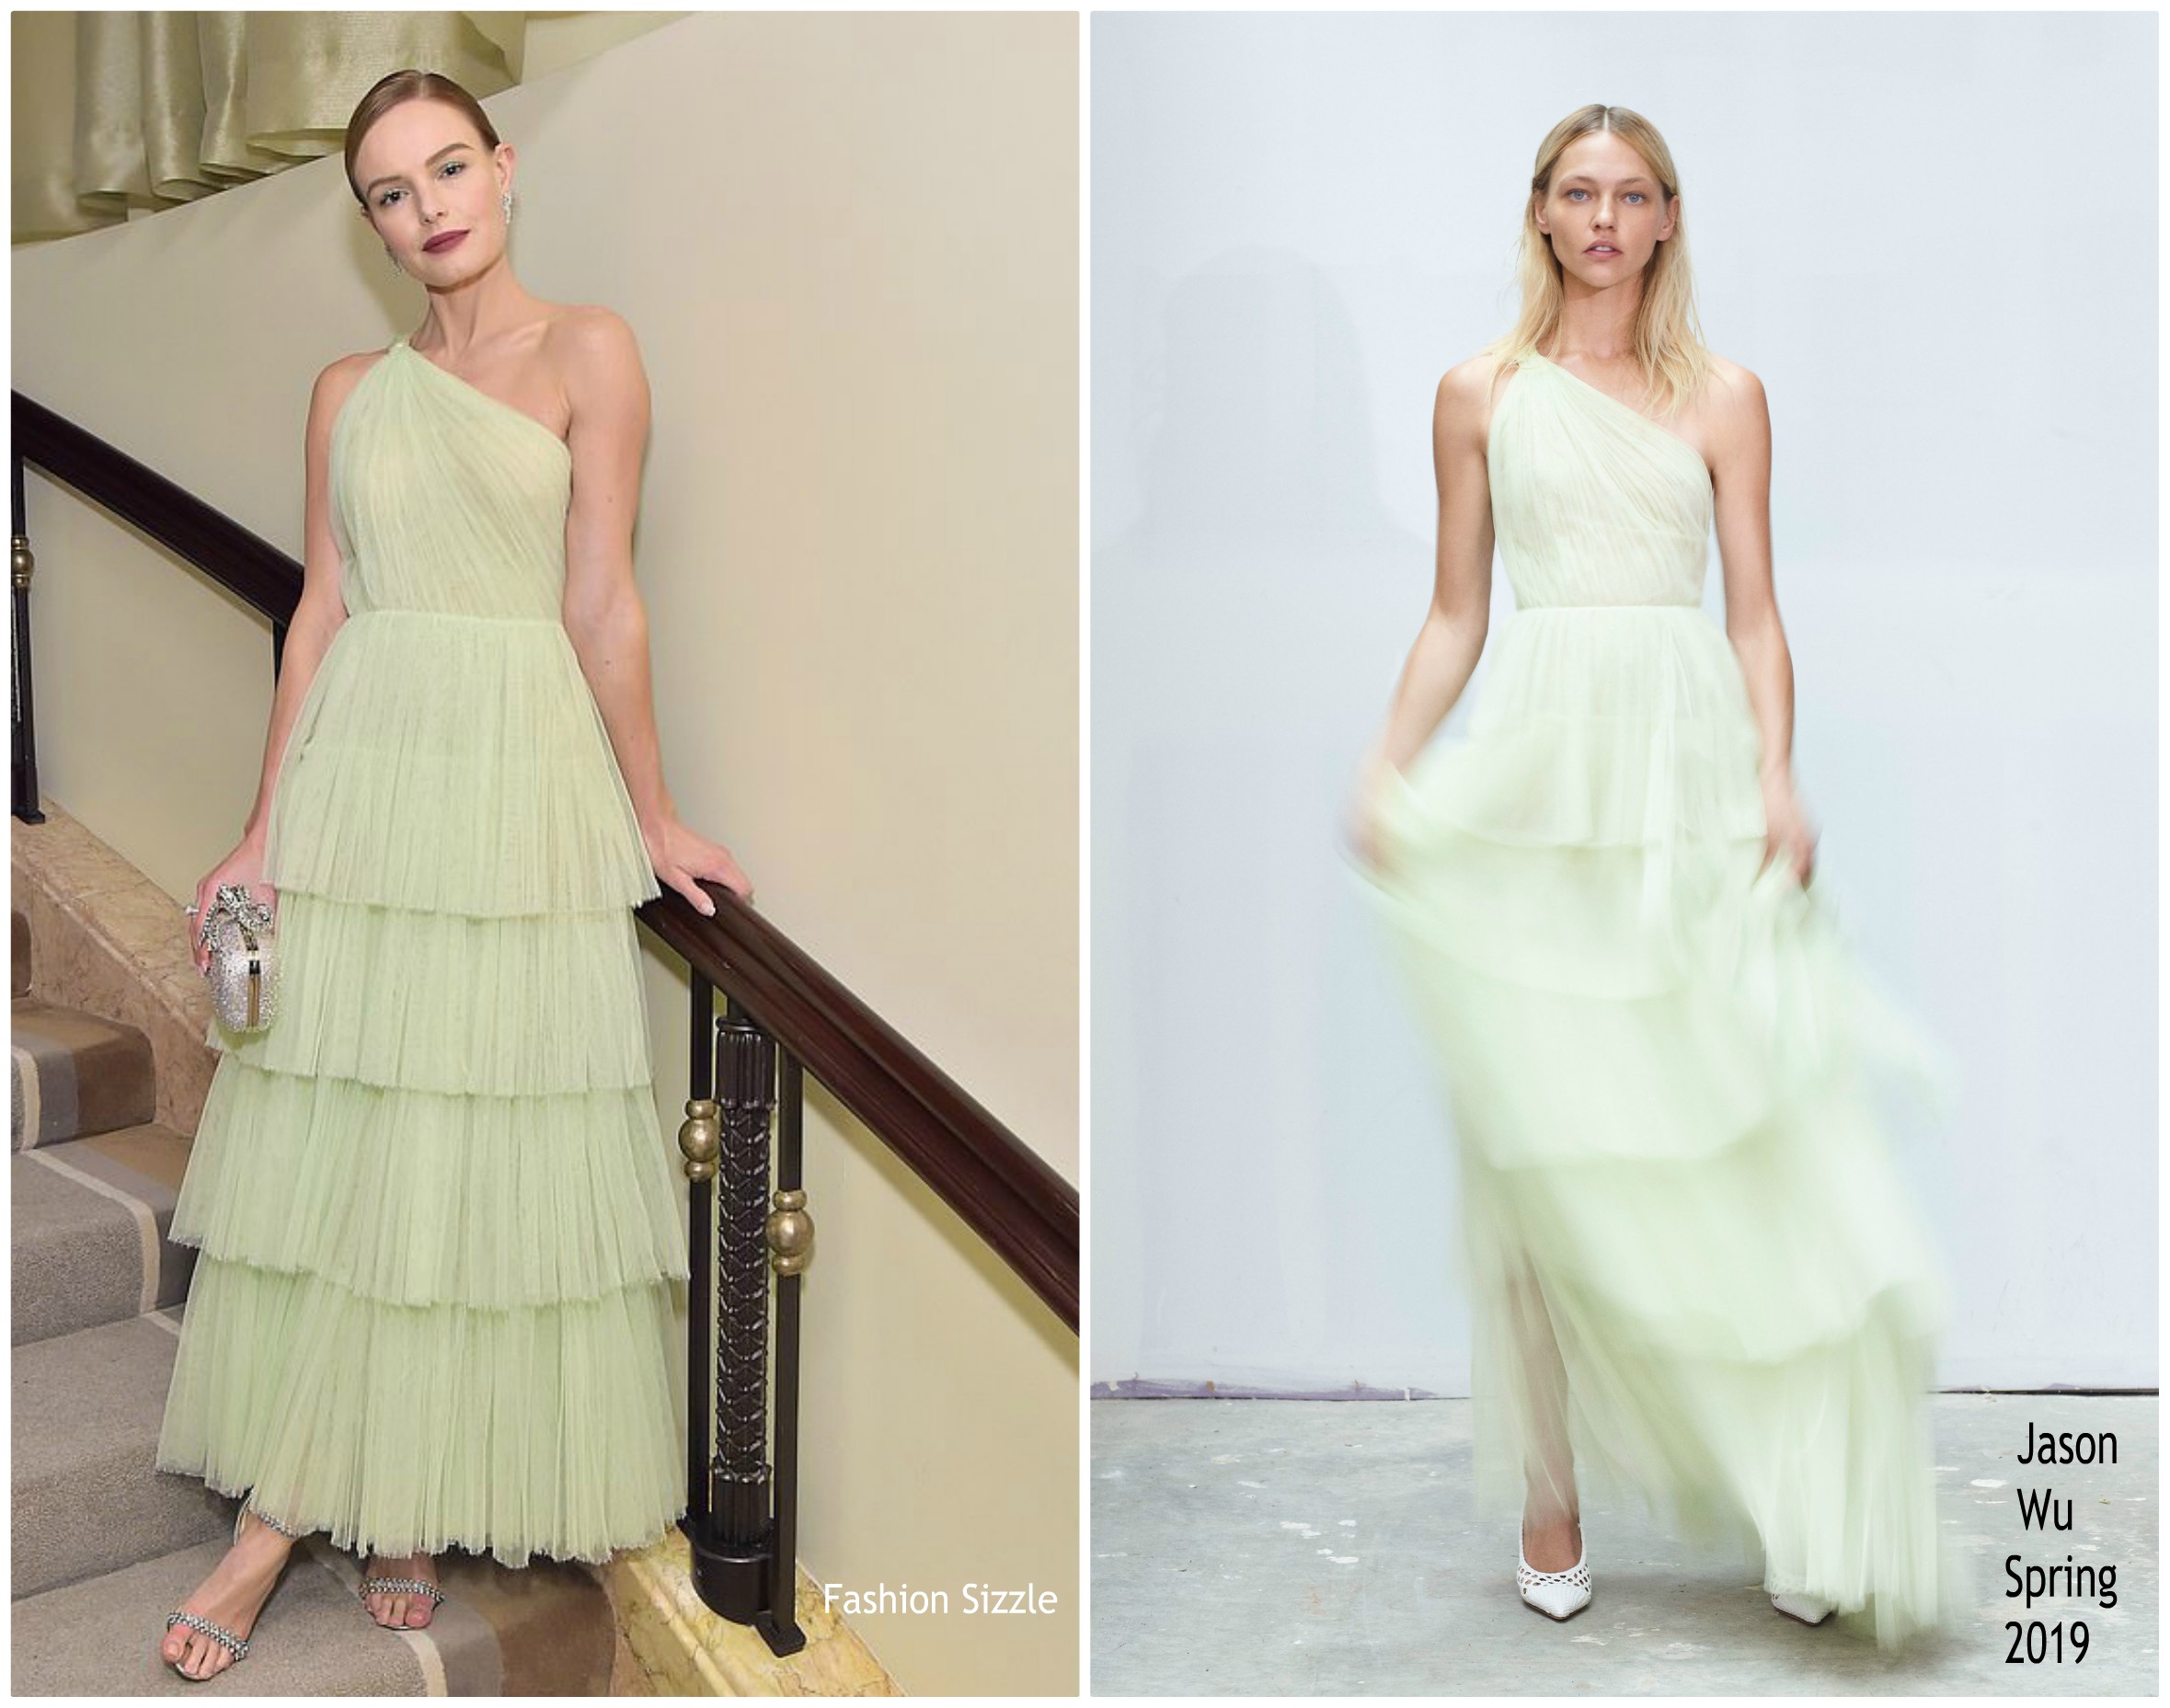 kate-Bosworth-in-jason-wu-collection-learning-lab-ventures-2019-gala